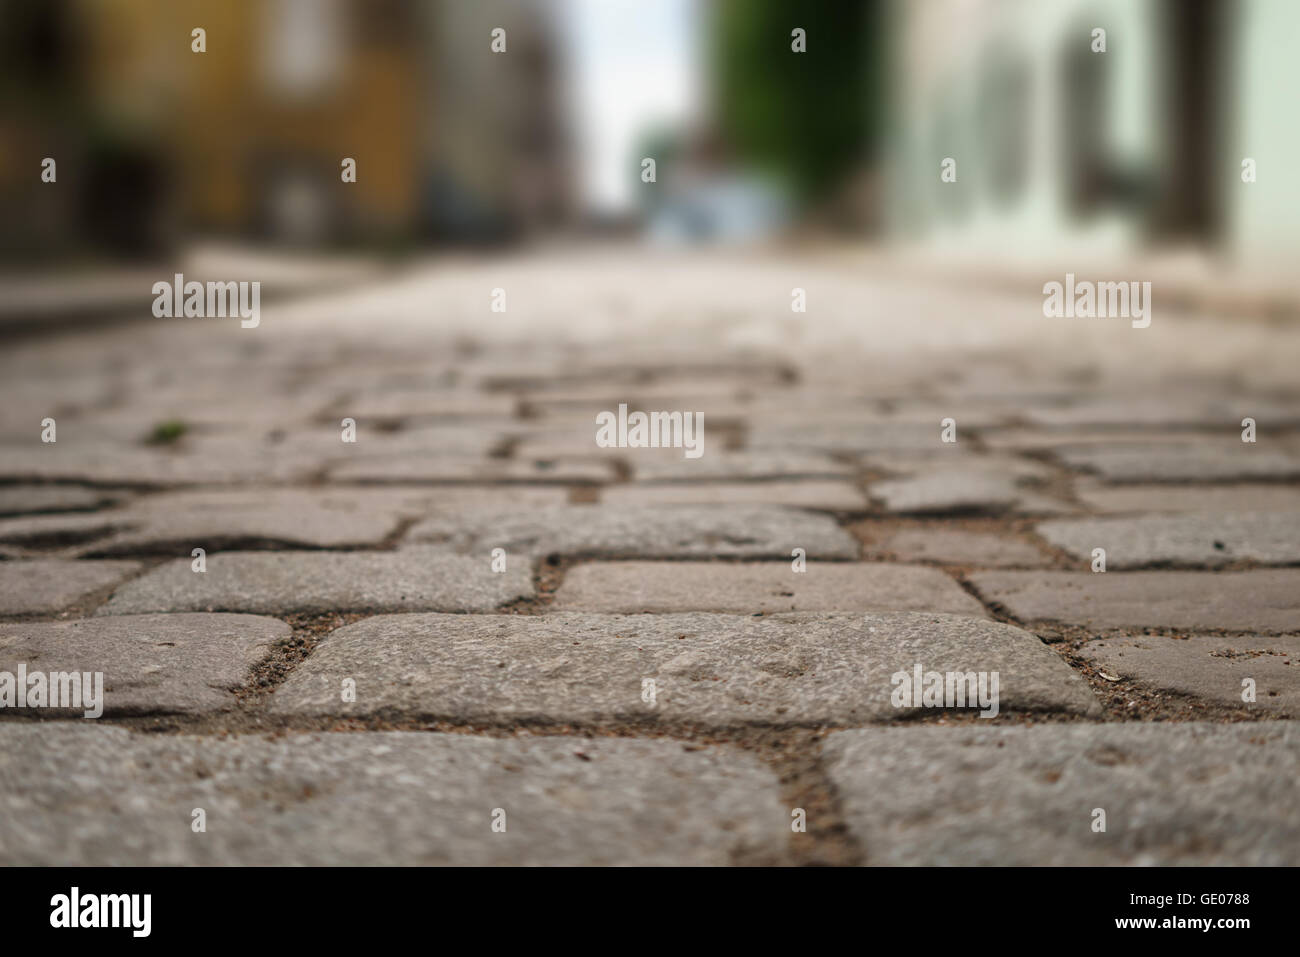 perspective view of old paved road in town Stock Photo